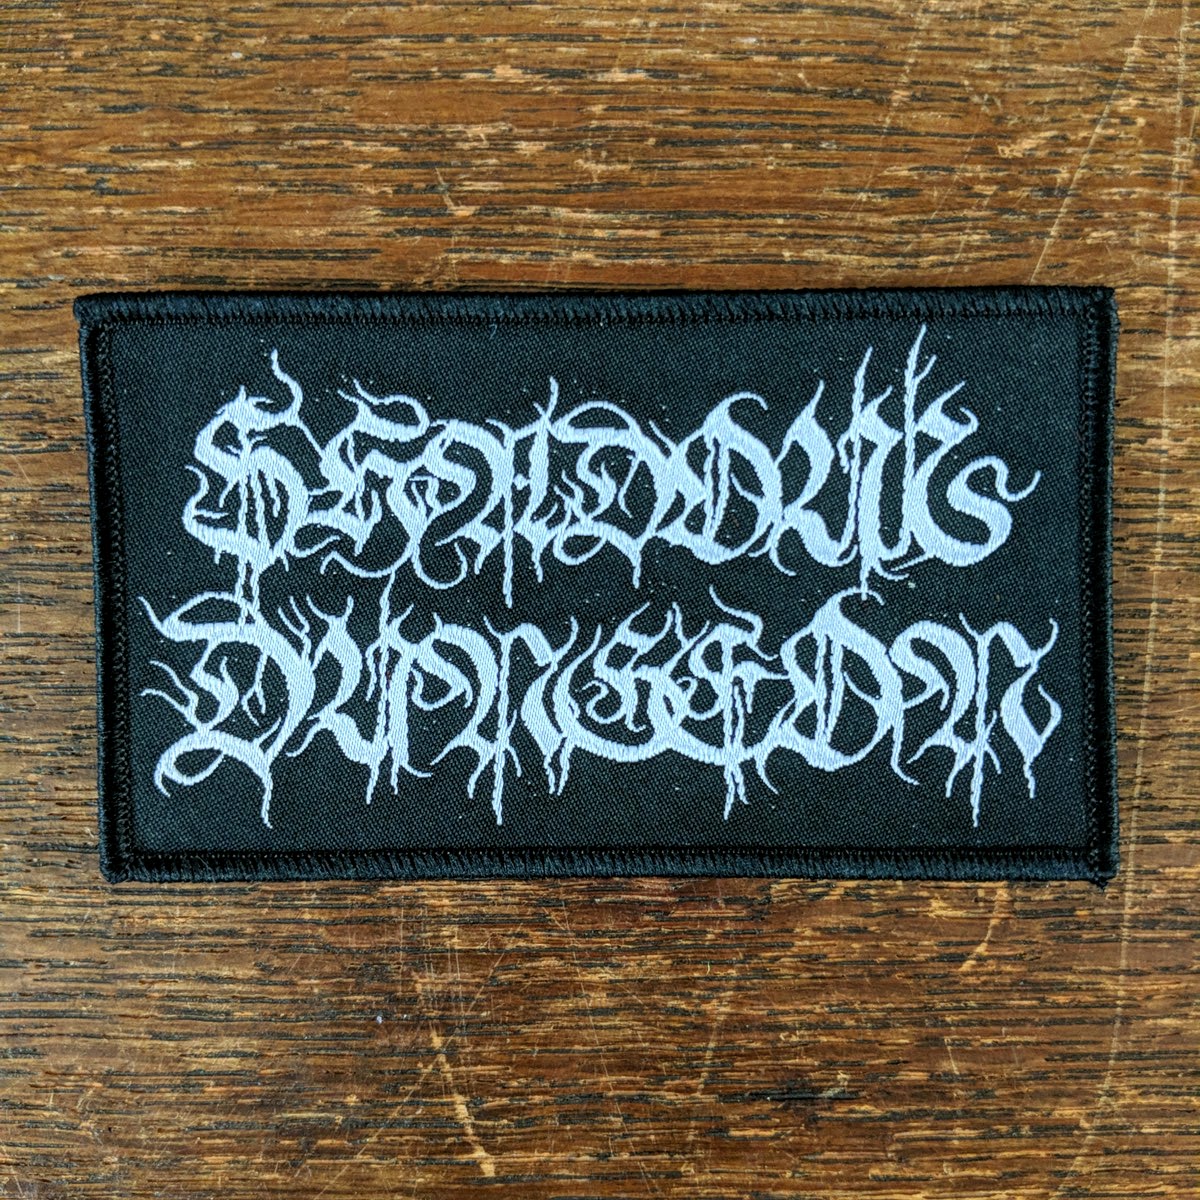 [SOLD OUT] SHADOW DUNGEON "Logo" Patch